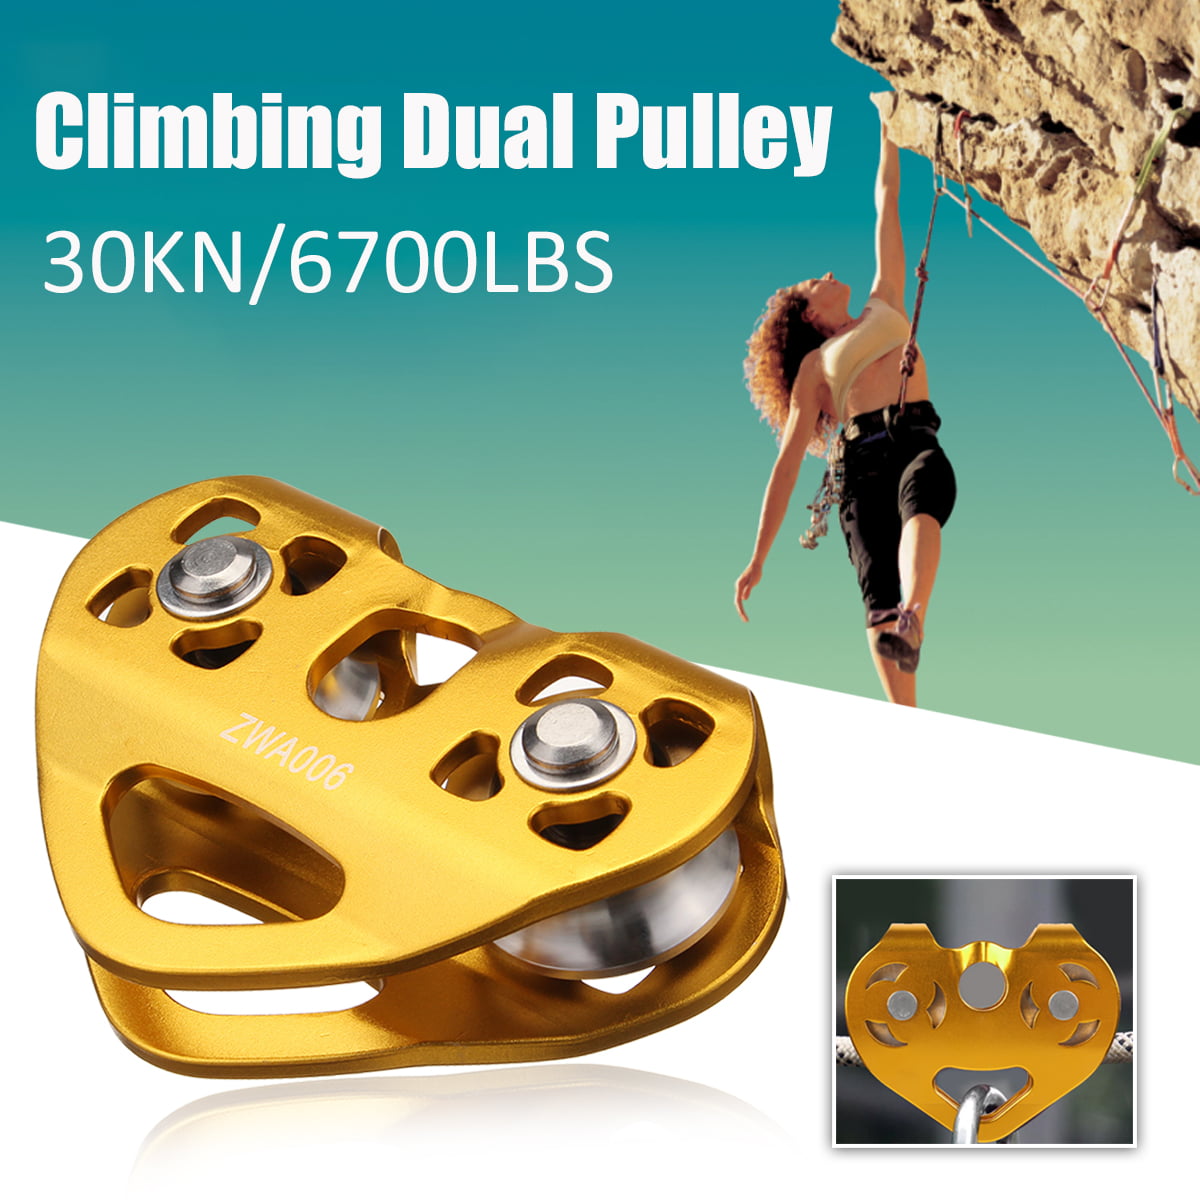 6700 Zip Line Cable Trolley Military Rock Climbing Outdoor Dual Pulley 30KN 